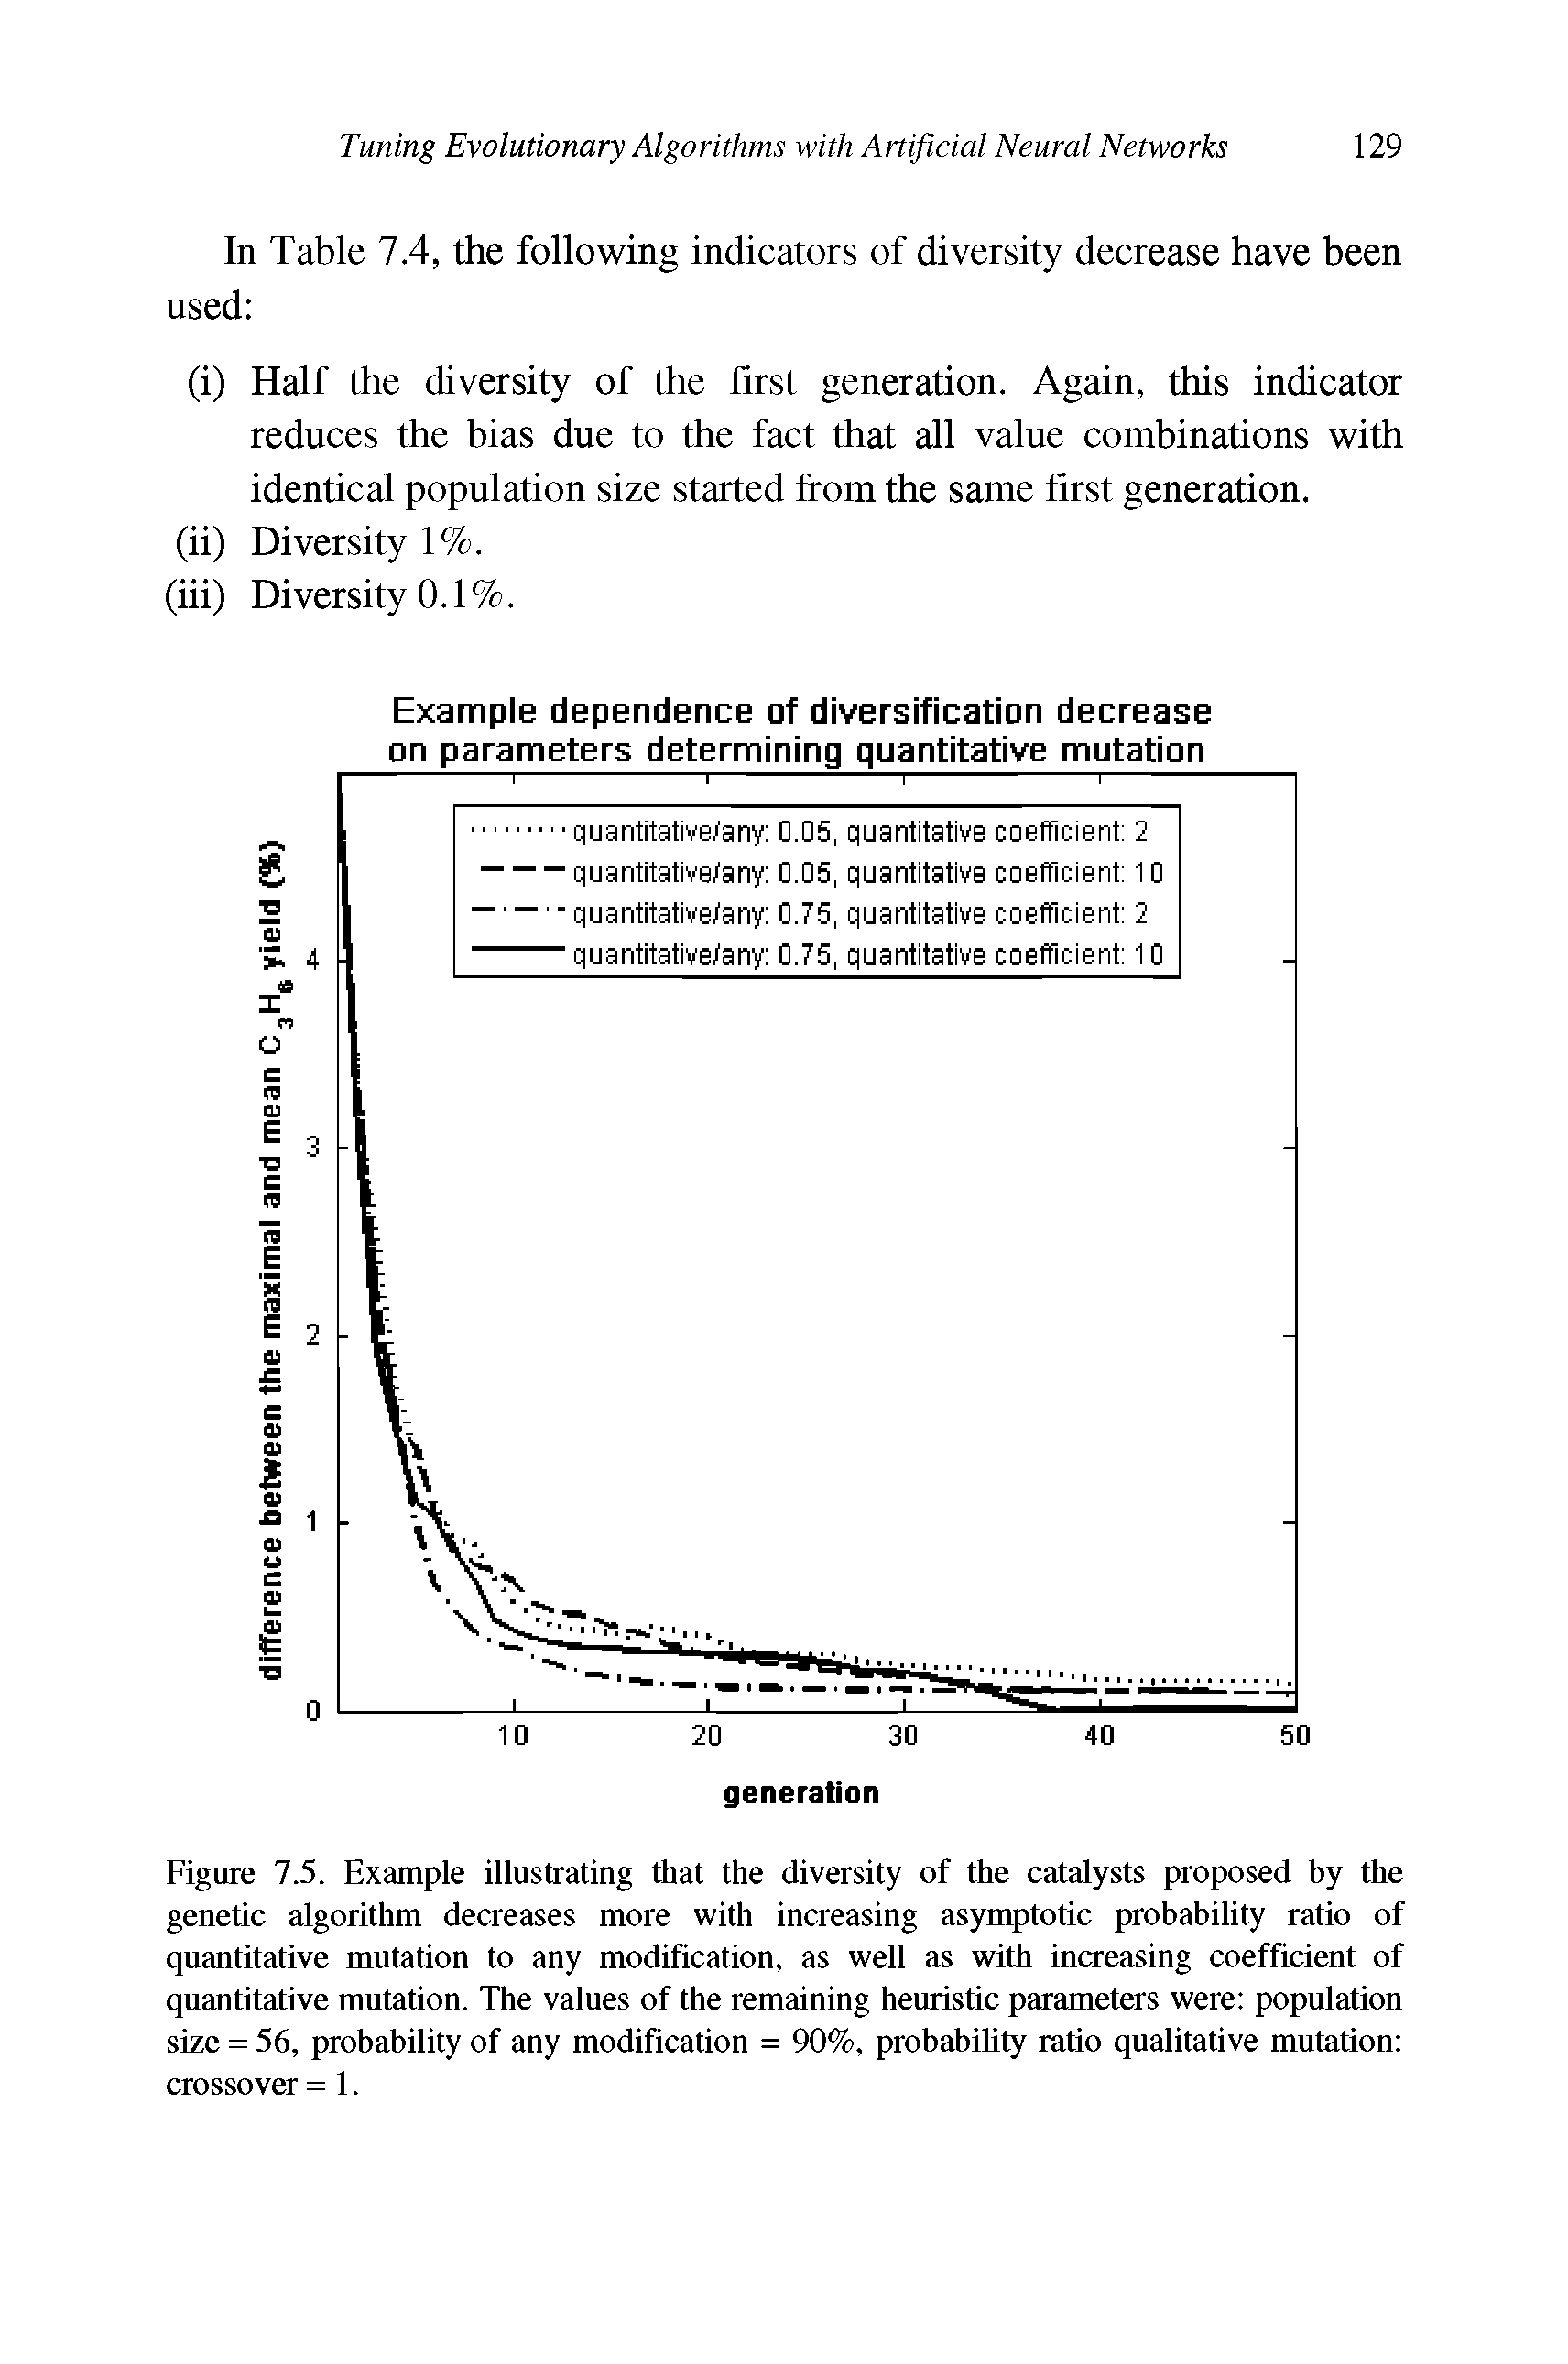 Figure 7.5. Example illustrating that the diversity of the catalysts proposed by the genetic algorithm decreases more with increasing asymptotic probability ratio of quantitative mutation to any modification, as well as with increasing coefficient of quantitative mutation. The values of the remaining heuristic parameters were population size = 56, probability of any modification = 90%, probability ratio qualitative mutation crossover = 1.